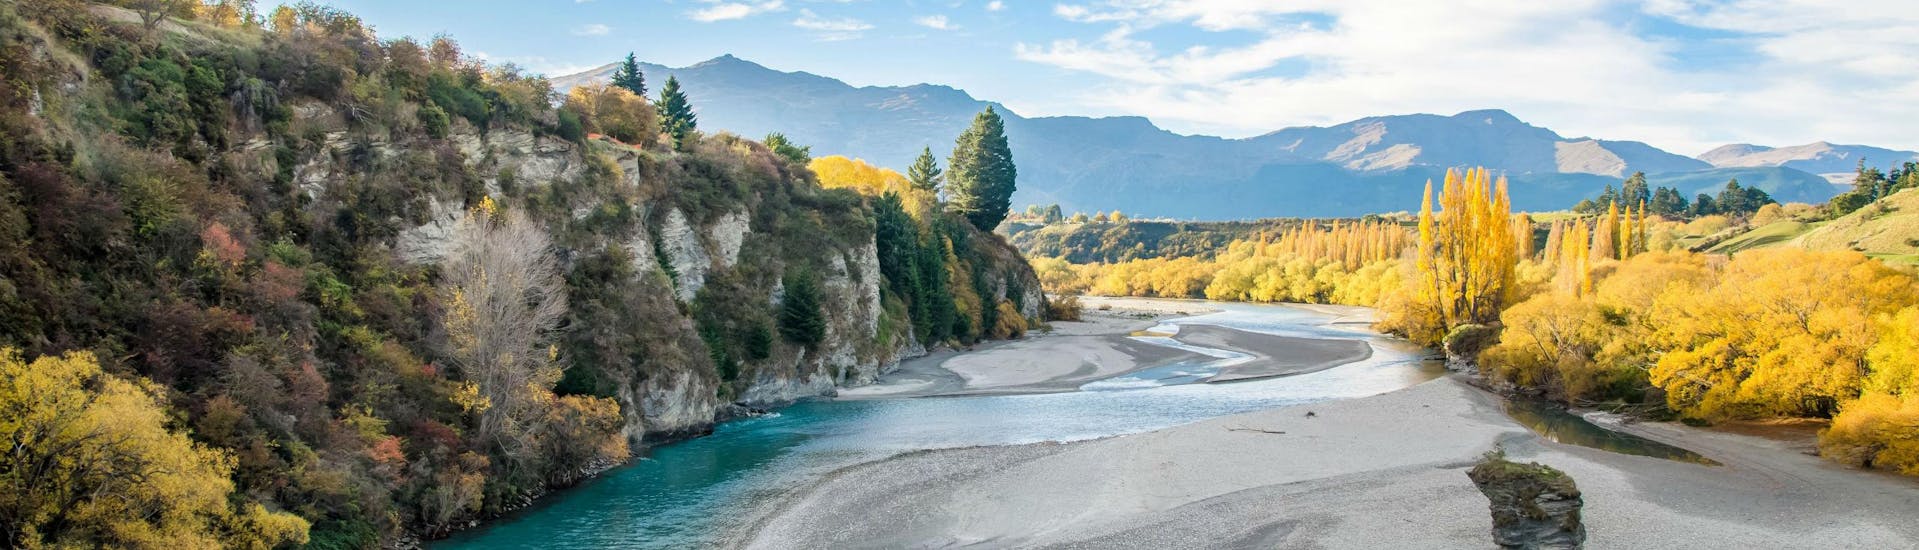 A view of the beautiful Shotover River that visitors paddle along when rafting in Queenstown.